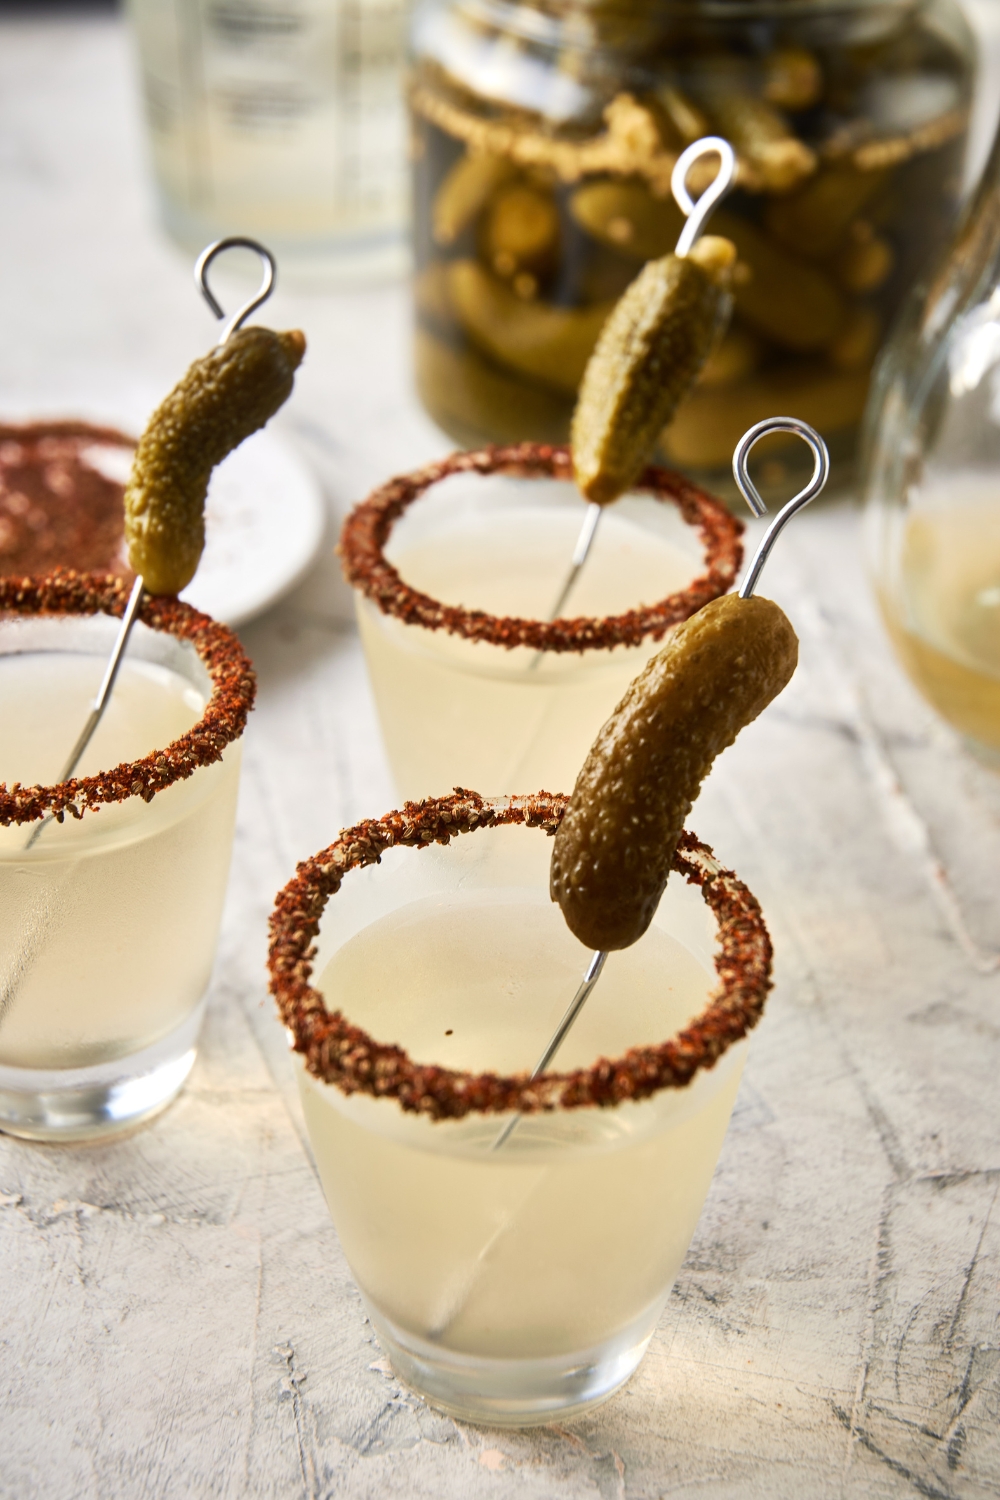 A few shot glasses with pickle shots and a garnished rim with a gerkin pickle.